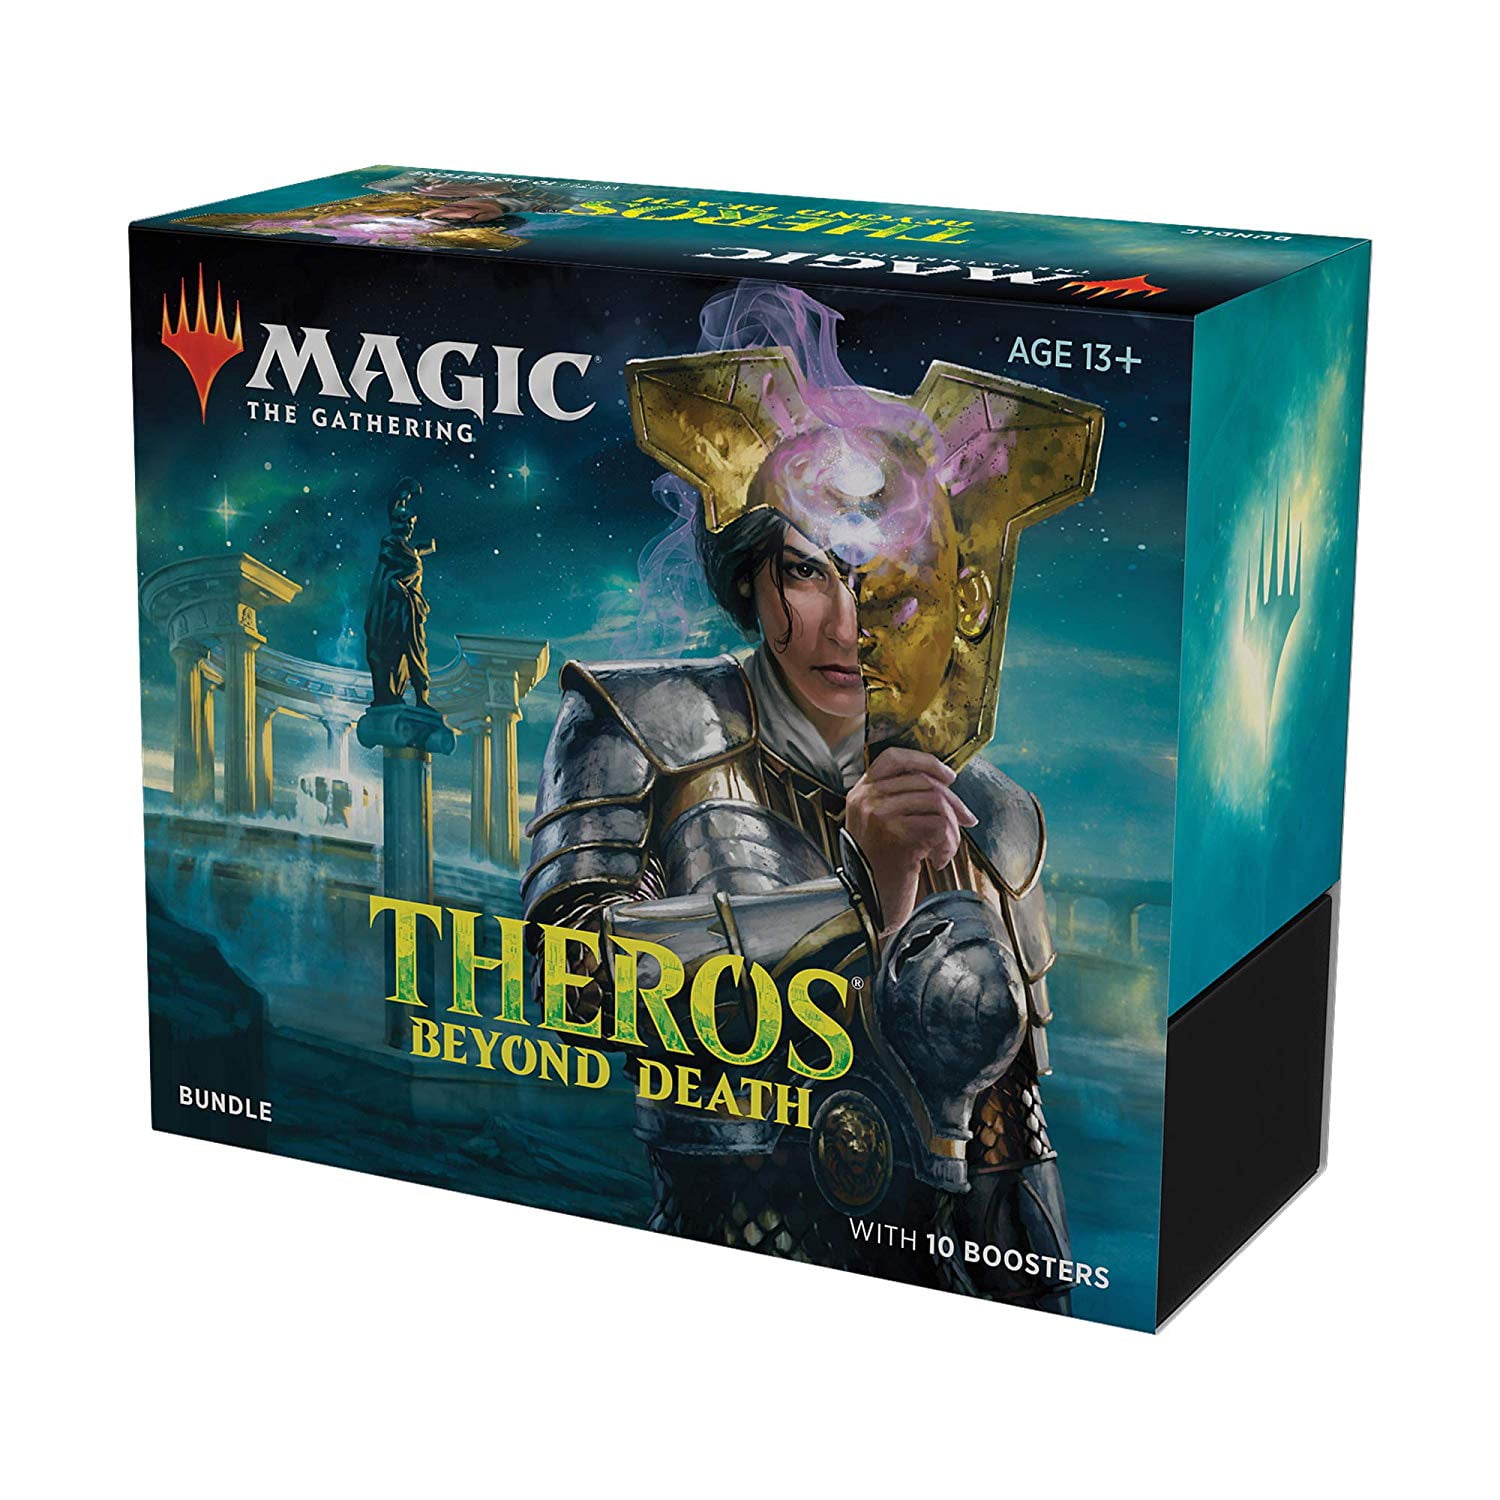 MAGIC THEROS BEYOND DEATH BUNDLE PRERELEASE KIT SAME DAY PRIORITY MAIL SHIPPING 